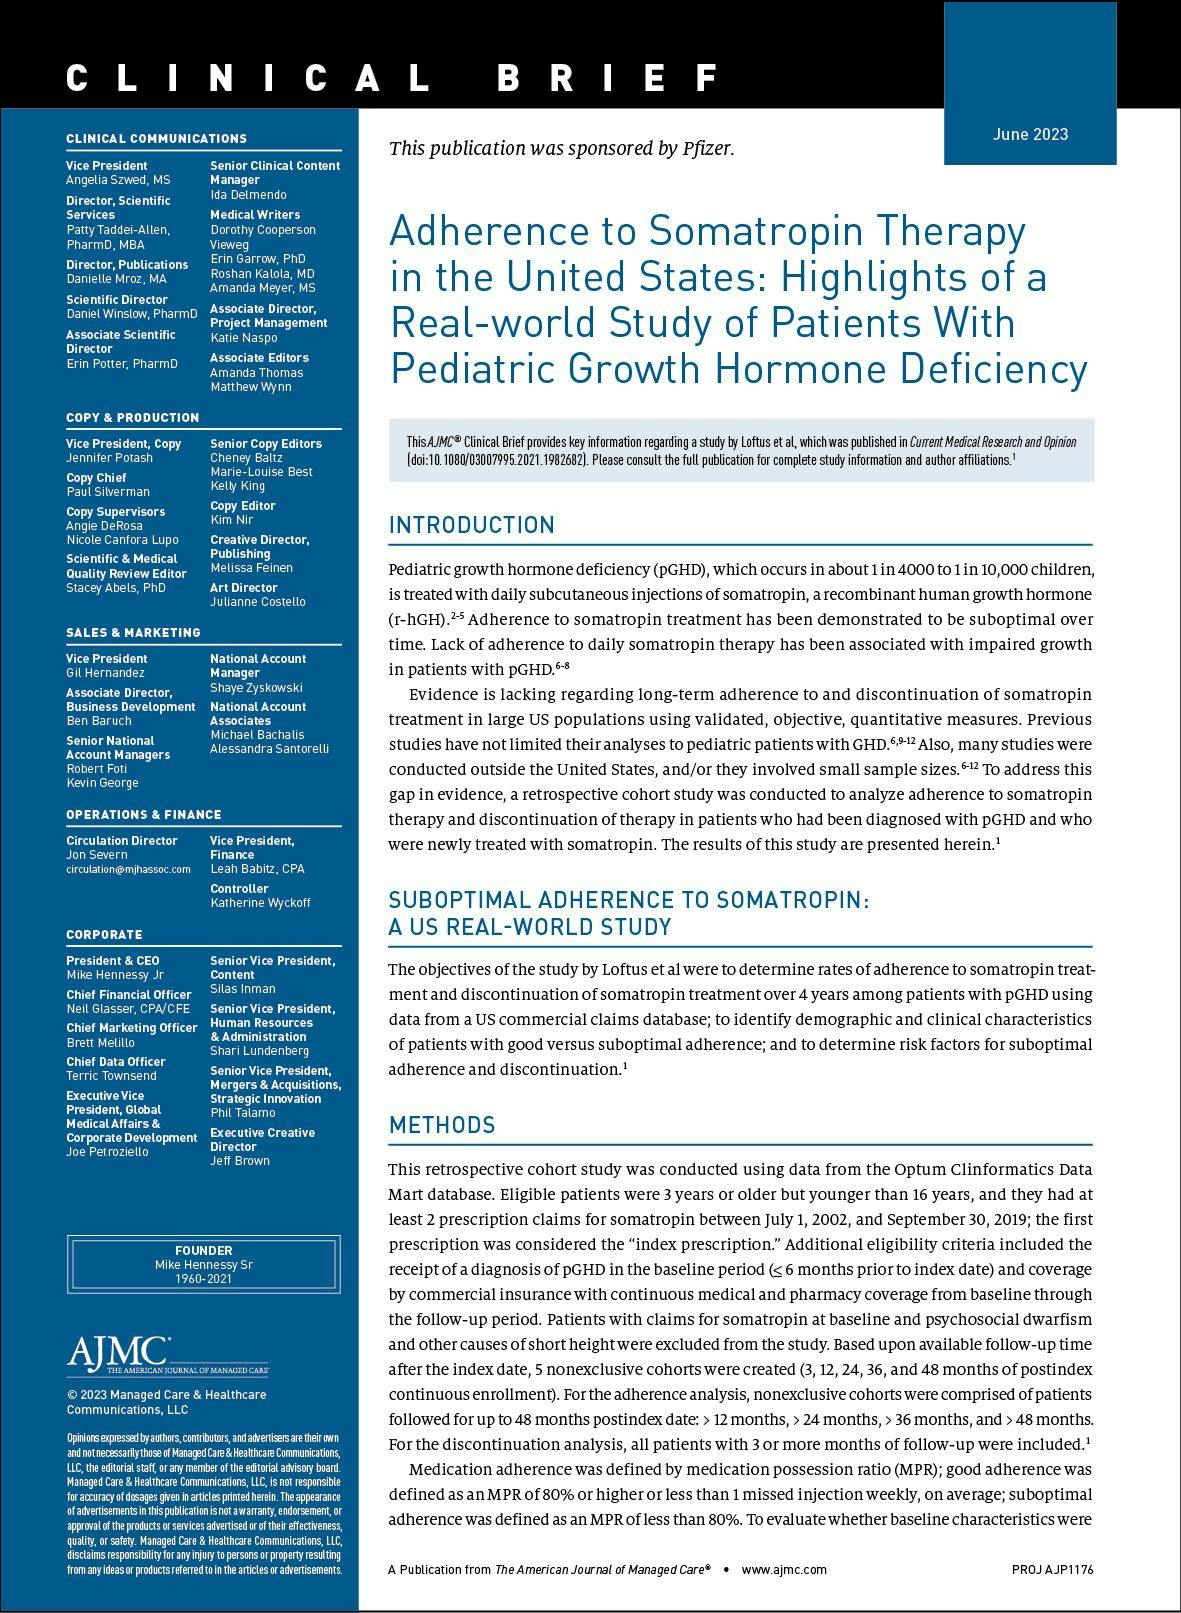 Adherence to Somatropin Therapy in the United States: Highlights of a Real-world Study of Patients With Pediatric Growth Hormone Deficiency